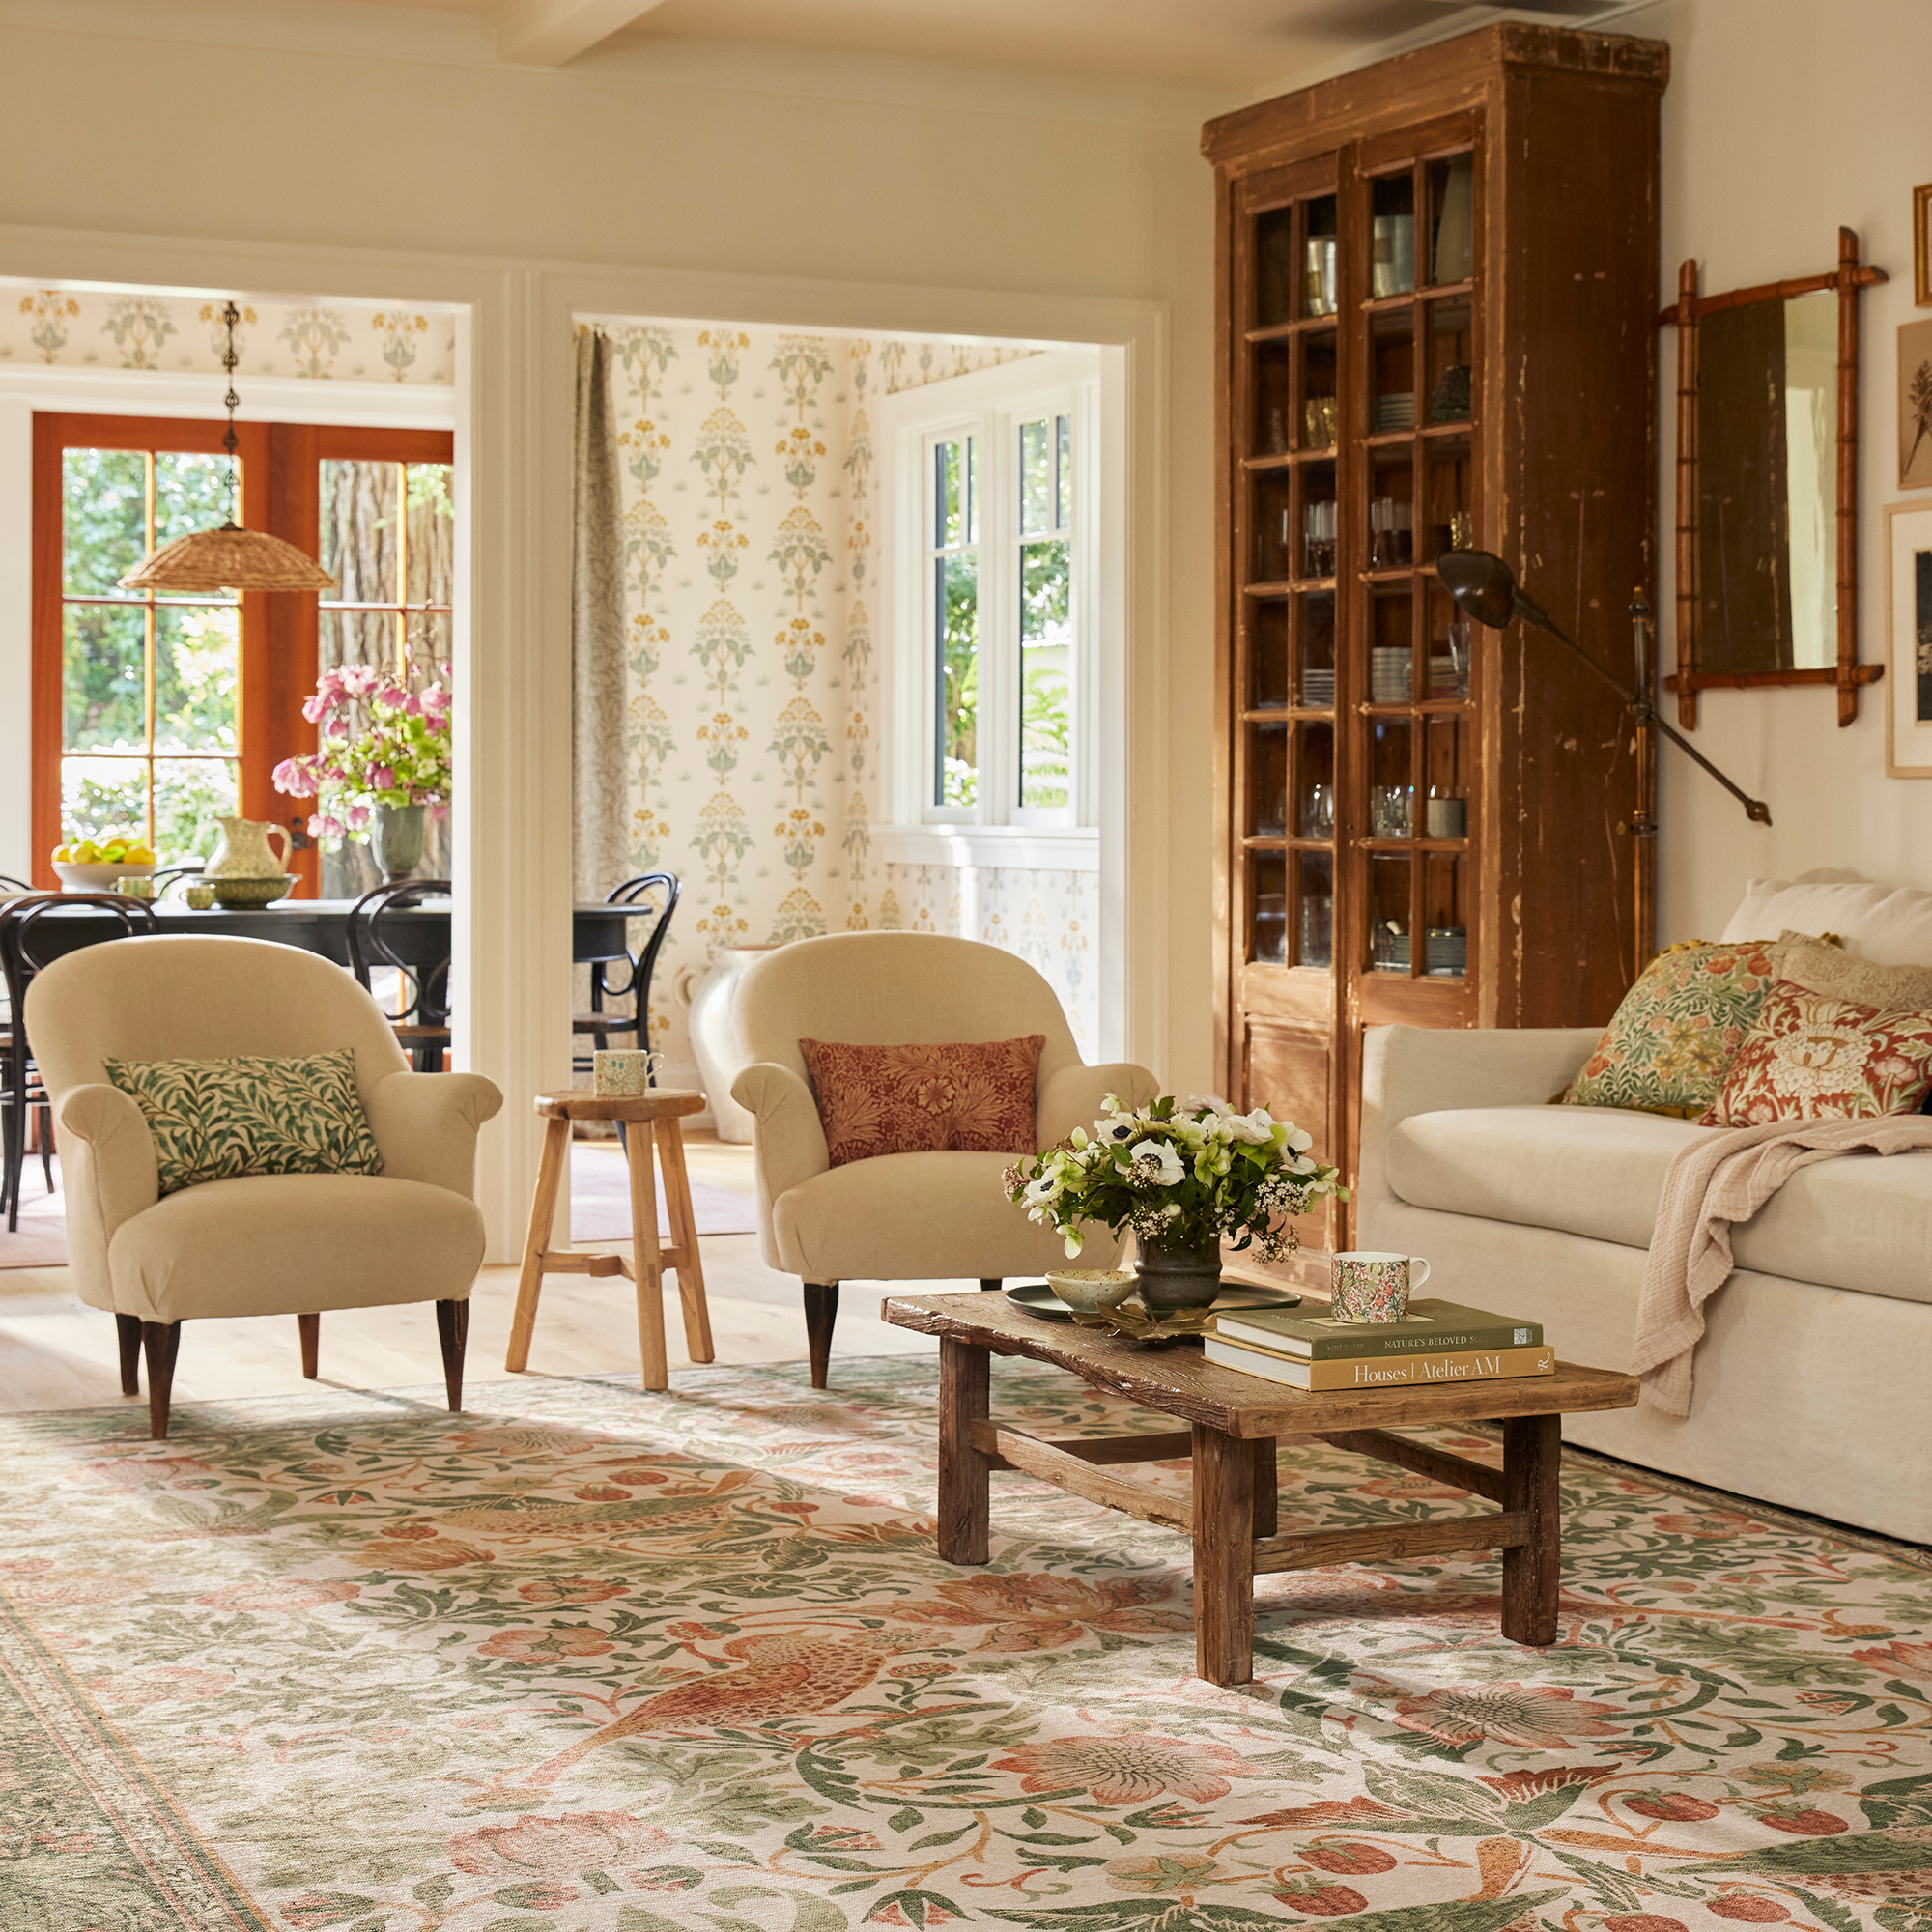 Living room with armchairs, sofa and coffee table on large rug